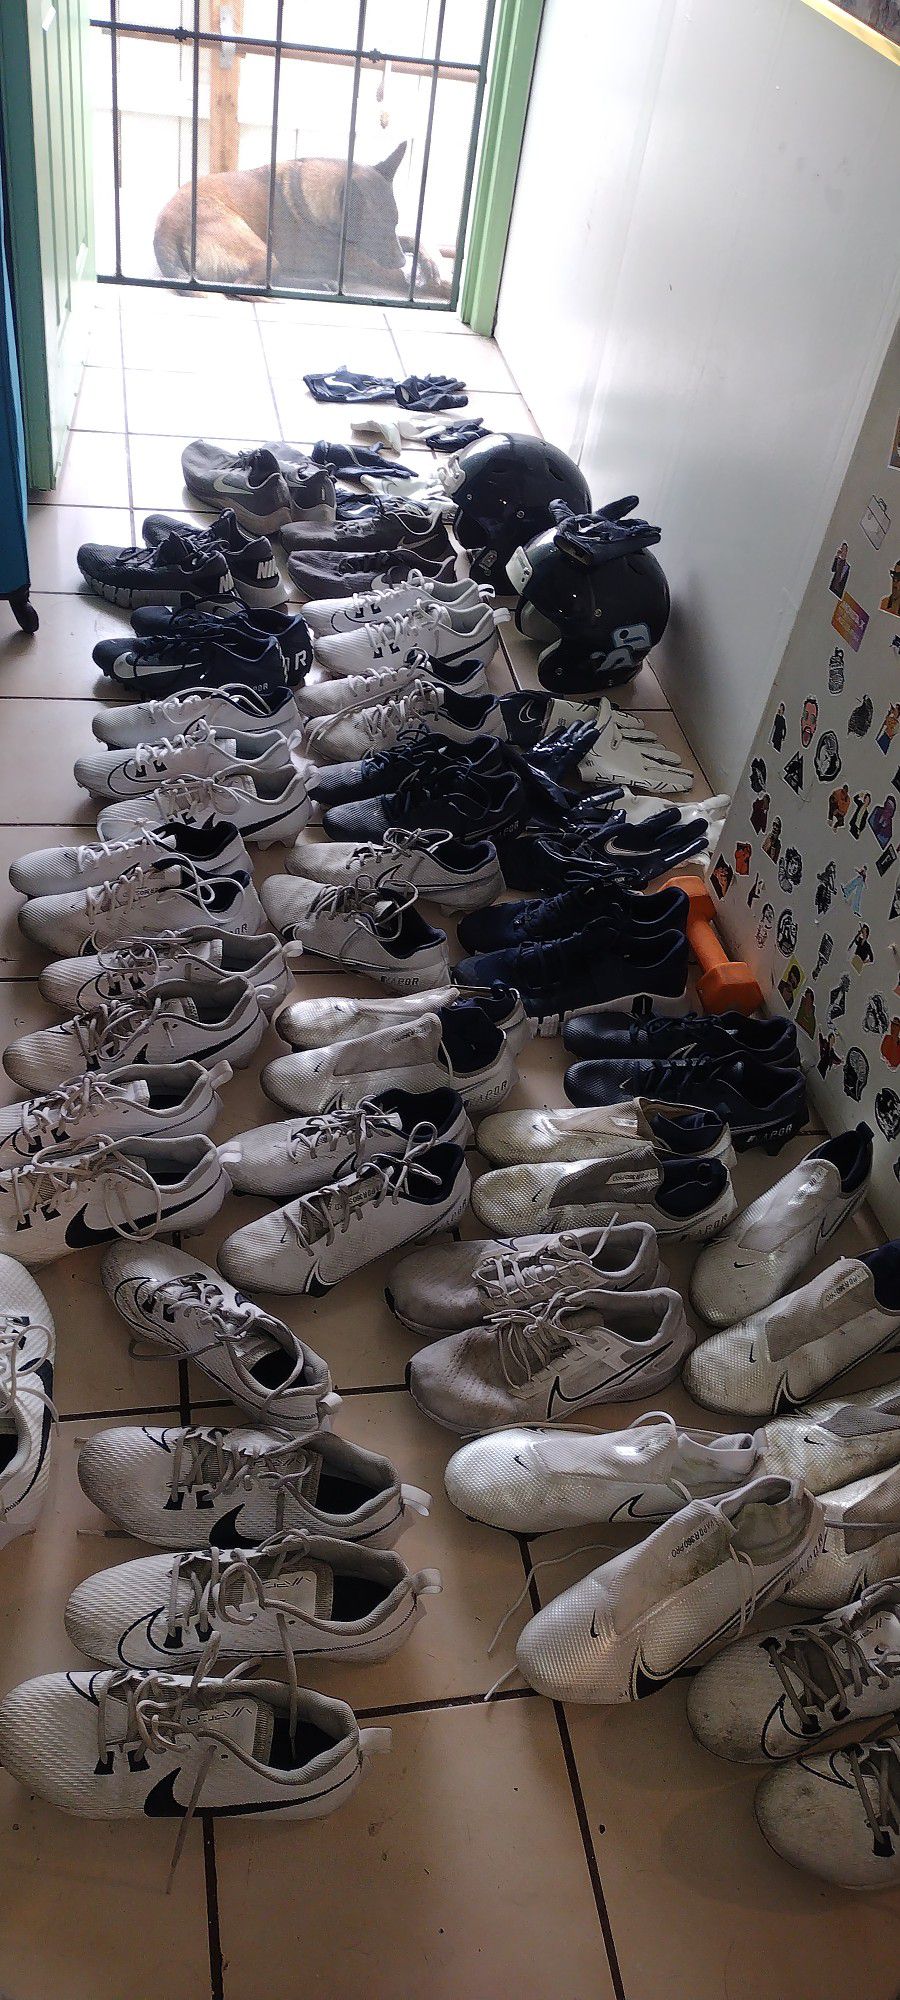 Baseball Cleats 30 Pair Total Plus Gloves And Helmet